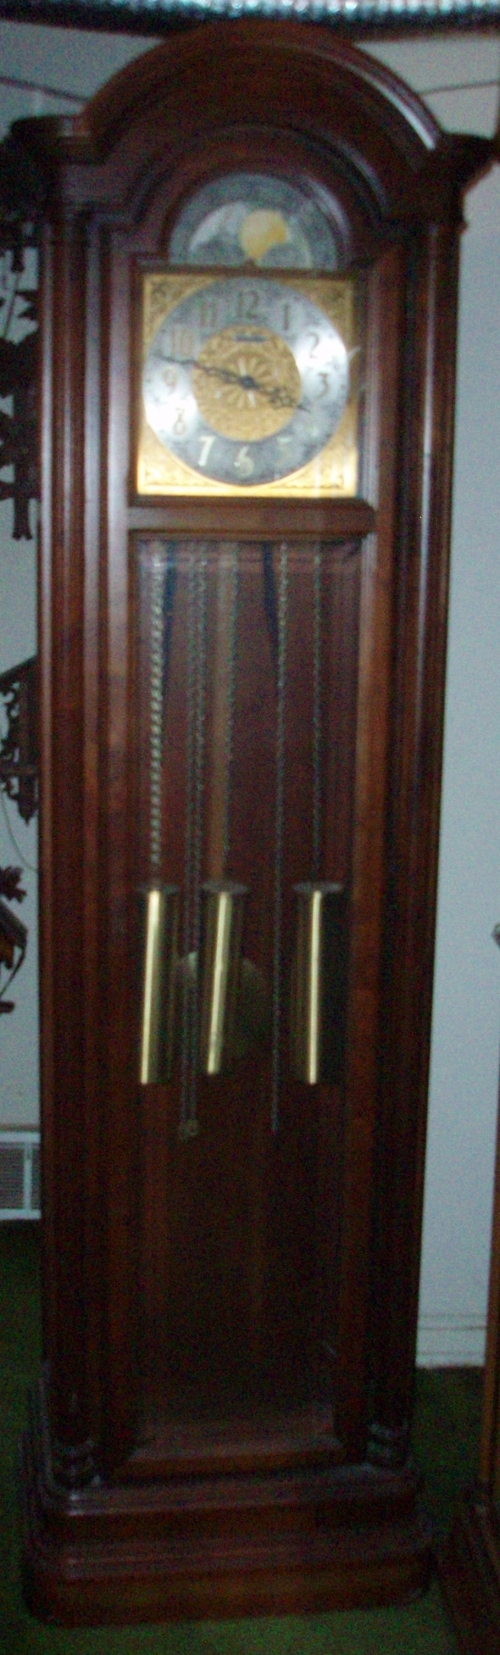 Valley Forge Grandfather Clock